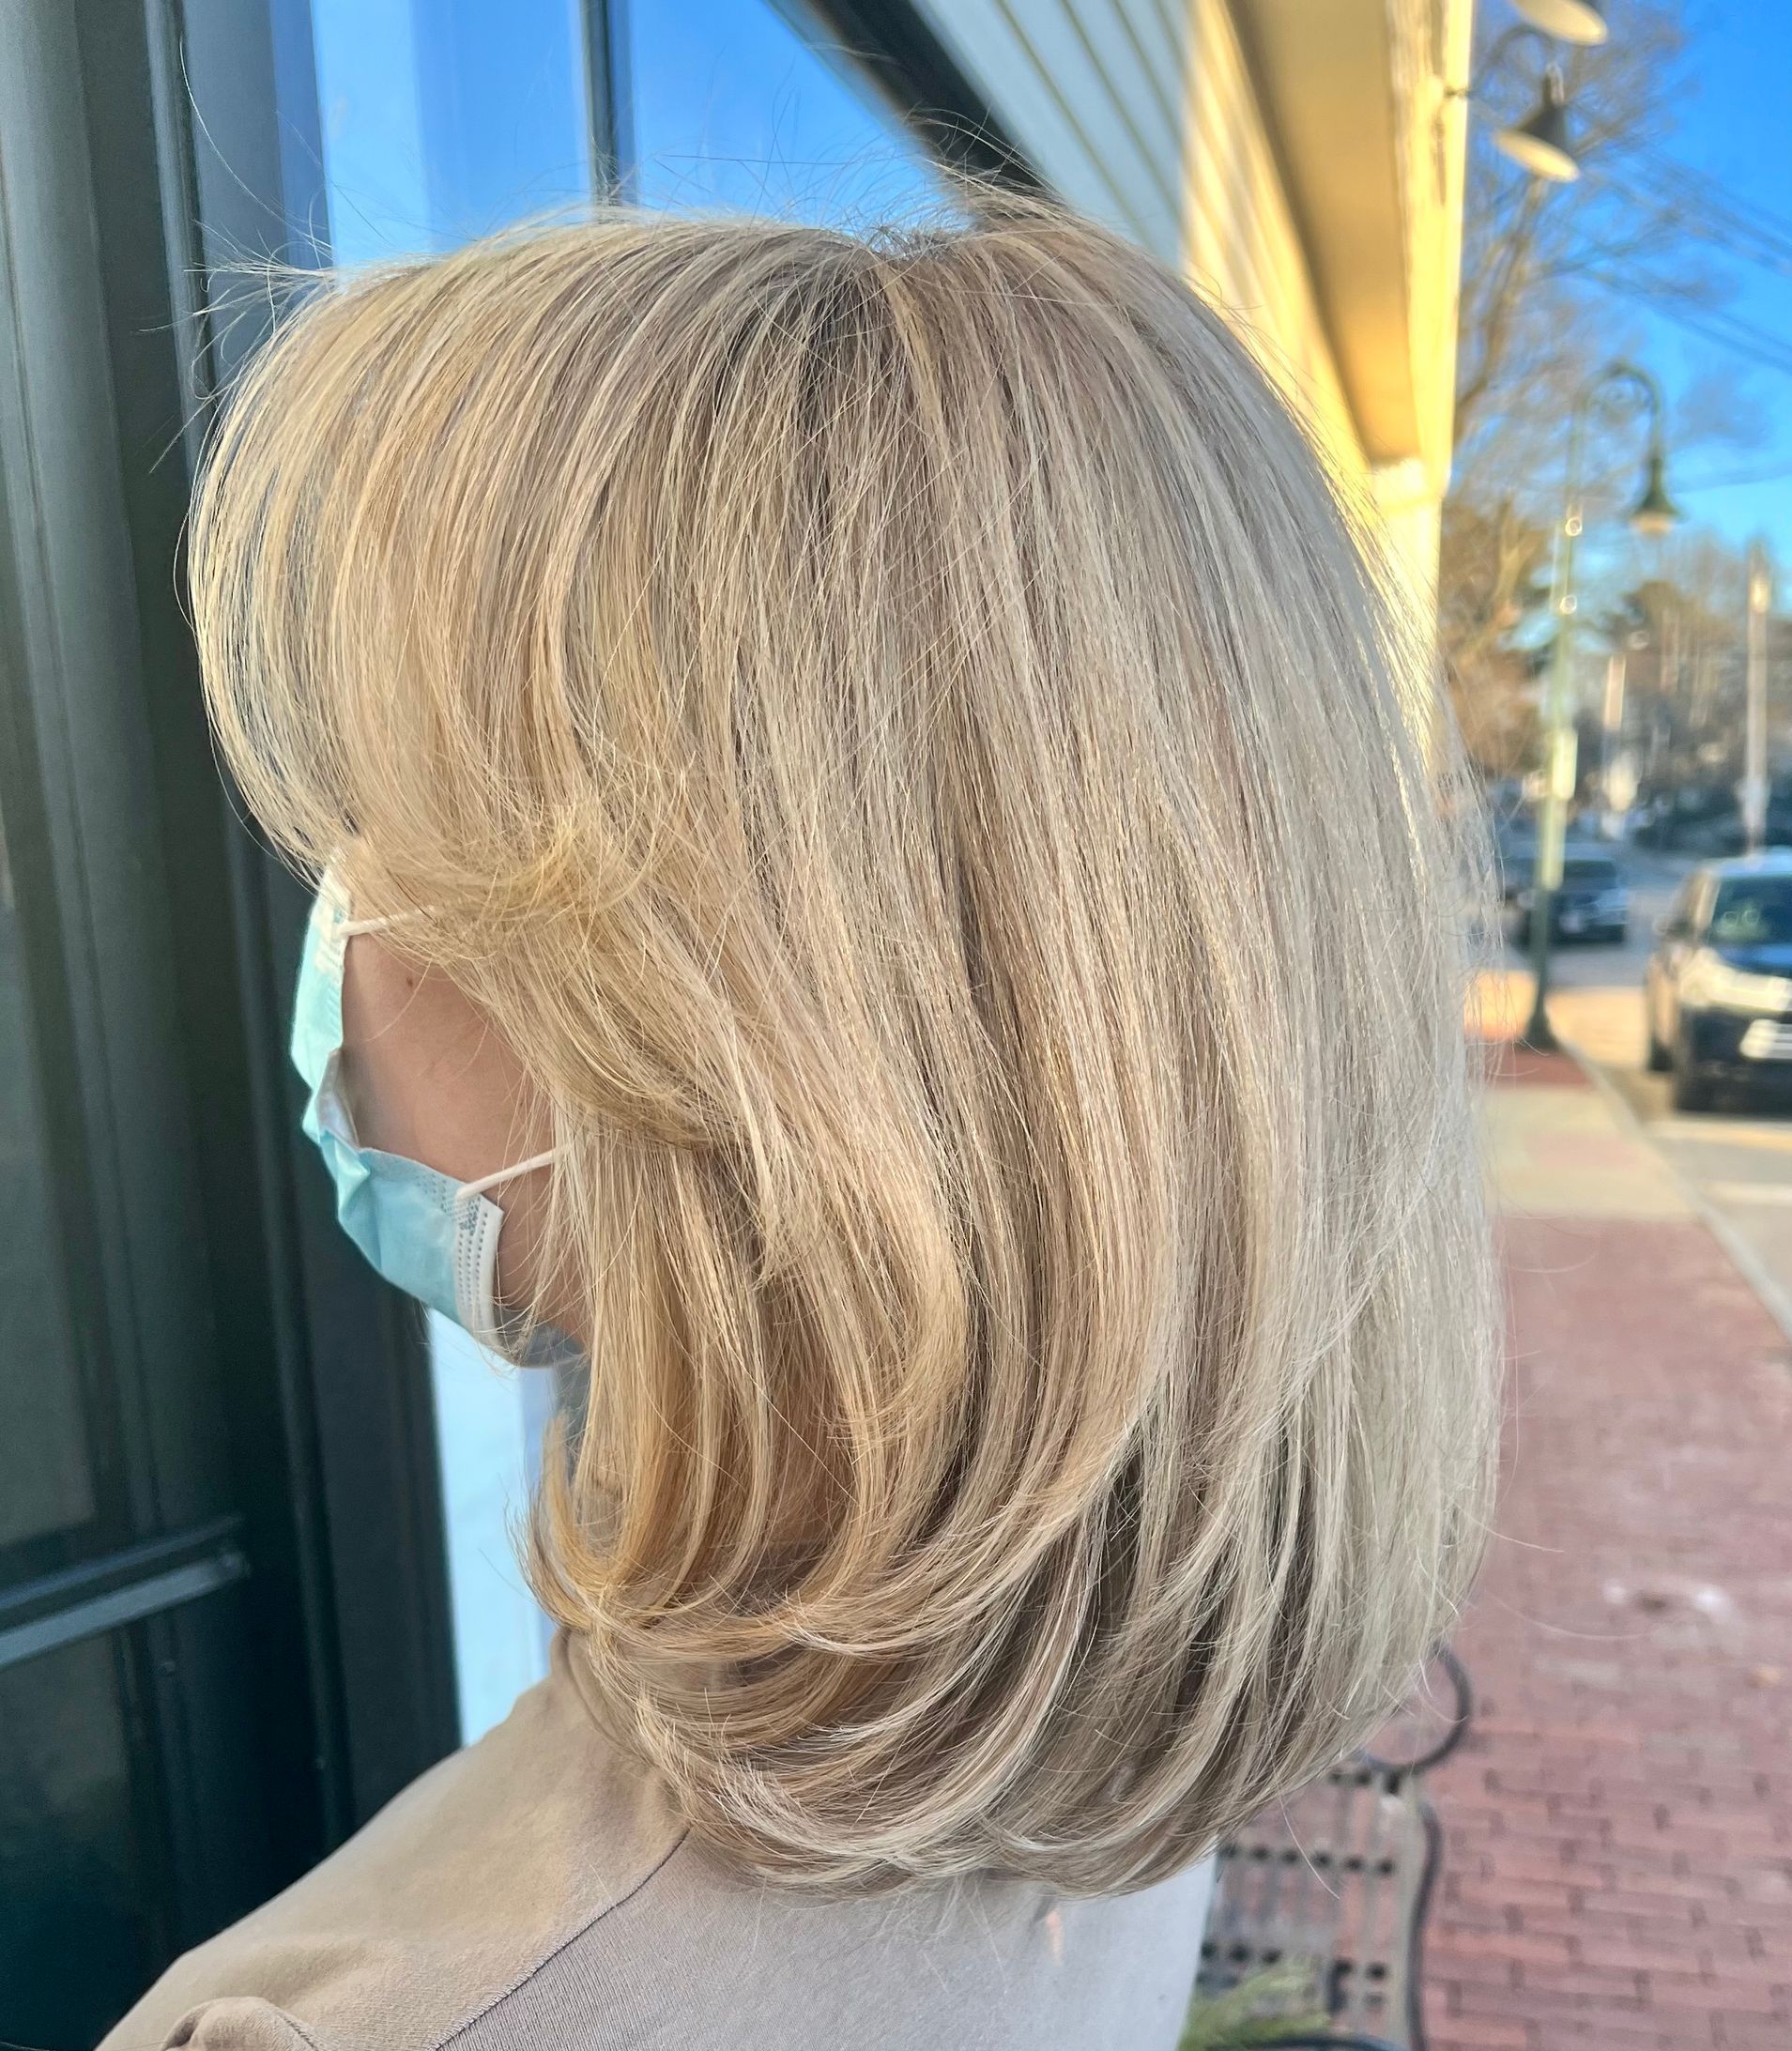 Blonde balayage after appointment